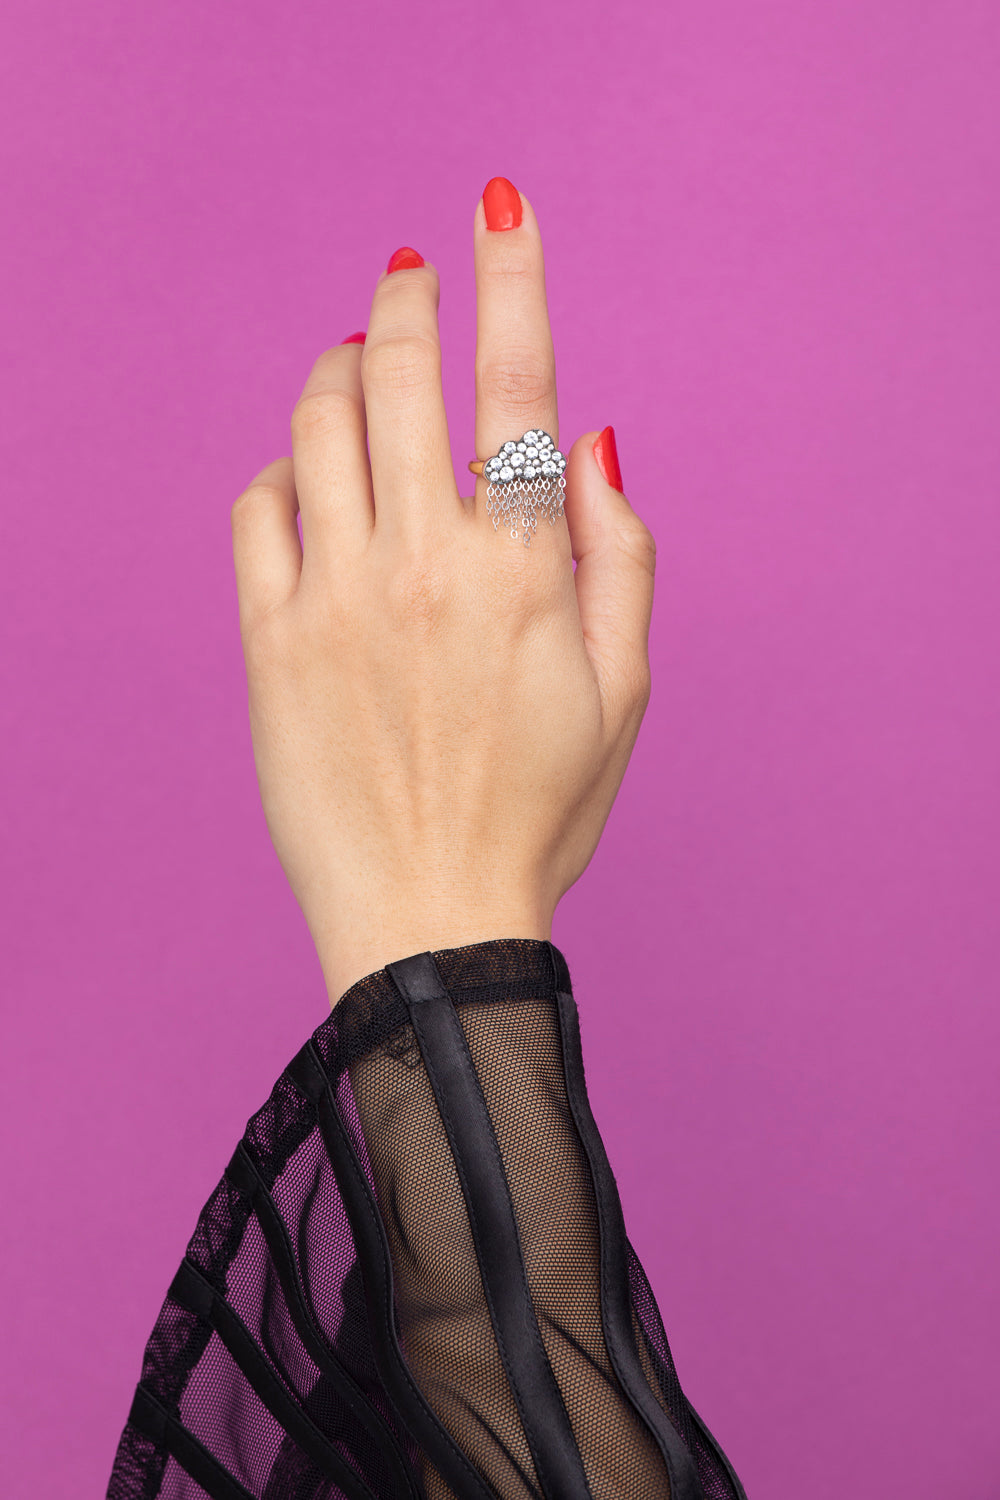 Rachel Quinn Jewelry black cloud shaped ring with pave white sapphires on cloud and dangling chains on yellow gold band on female model hand with purple background.